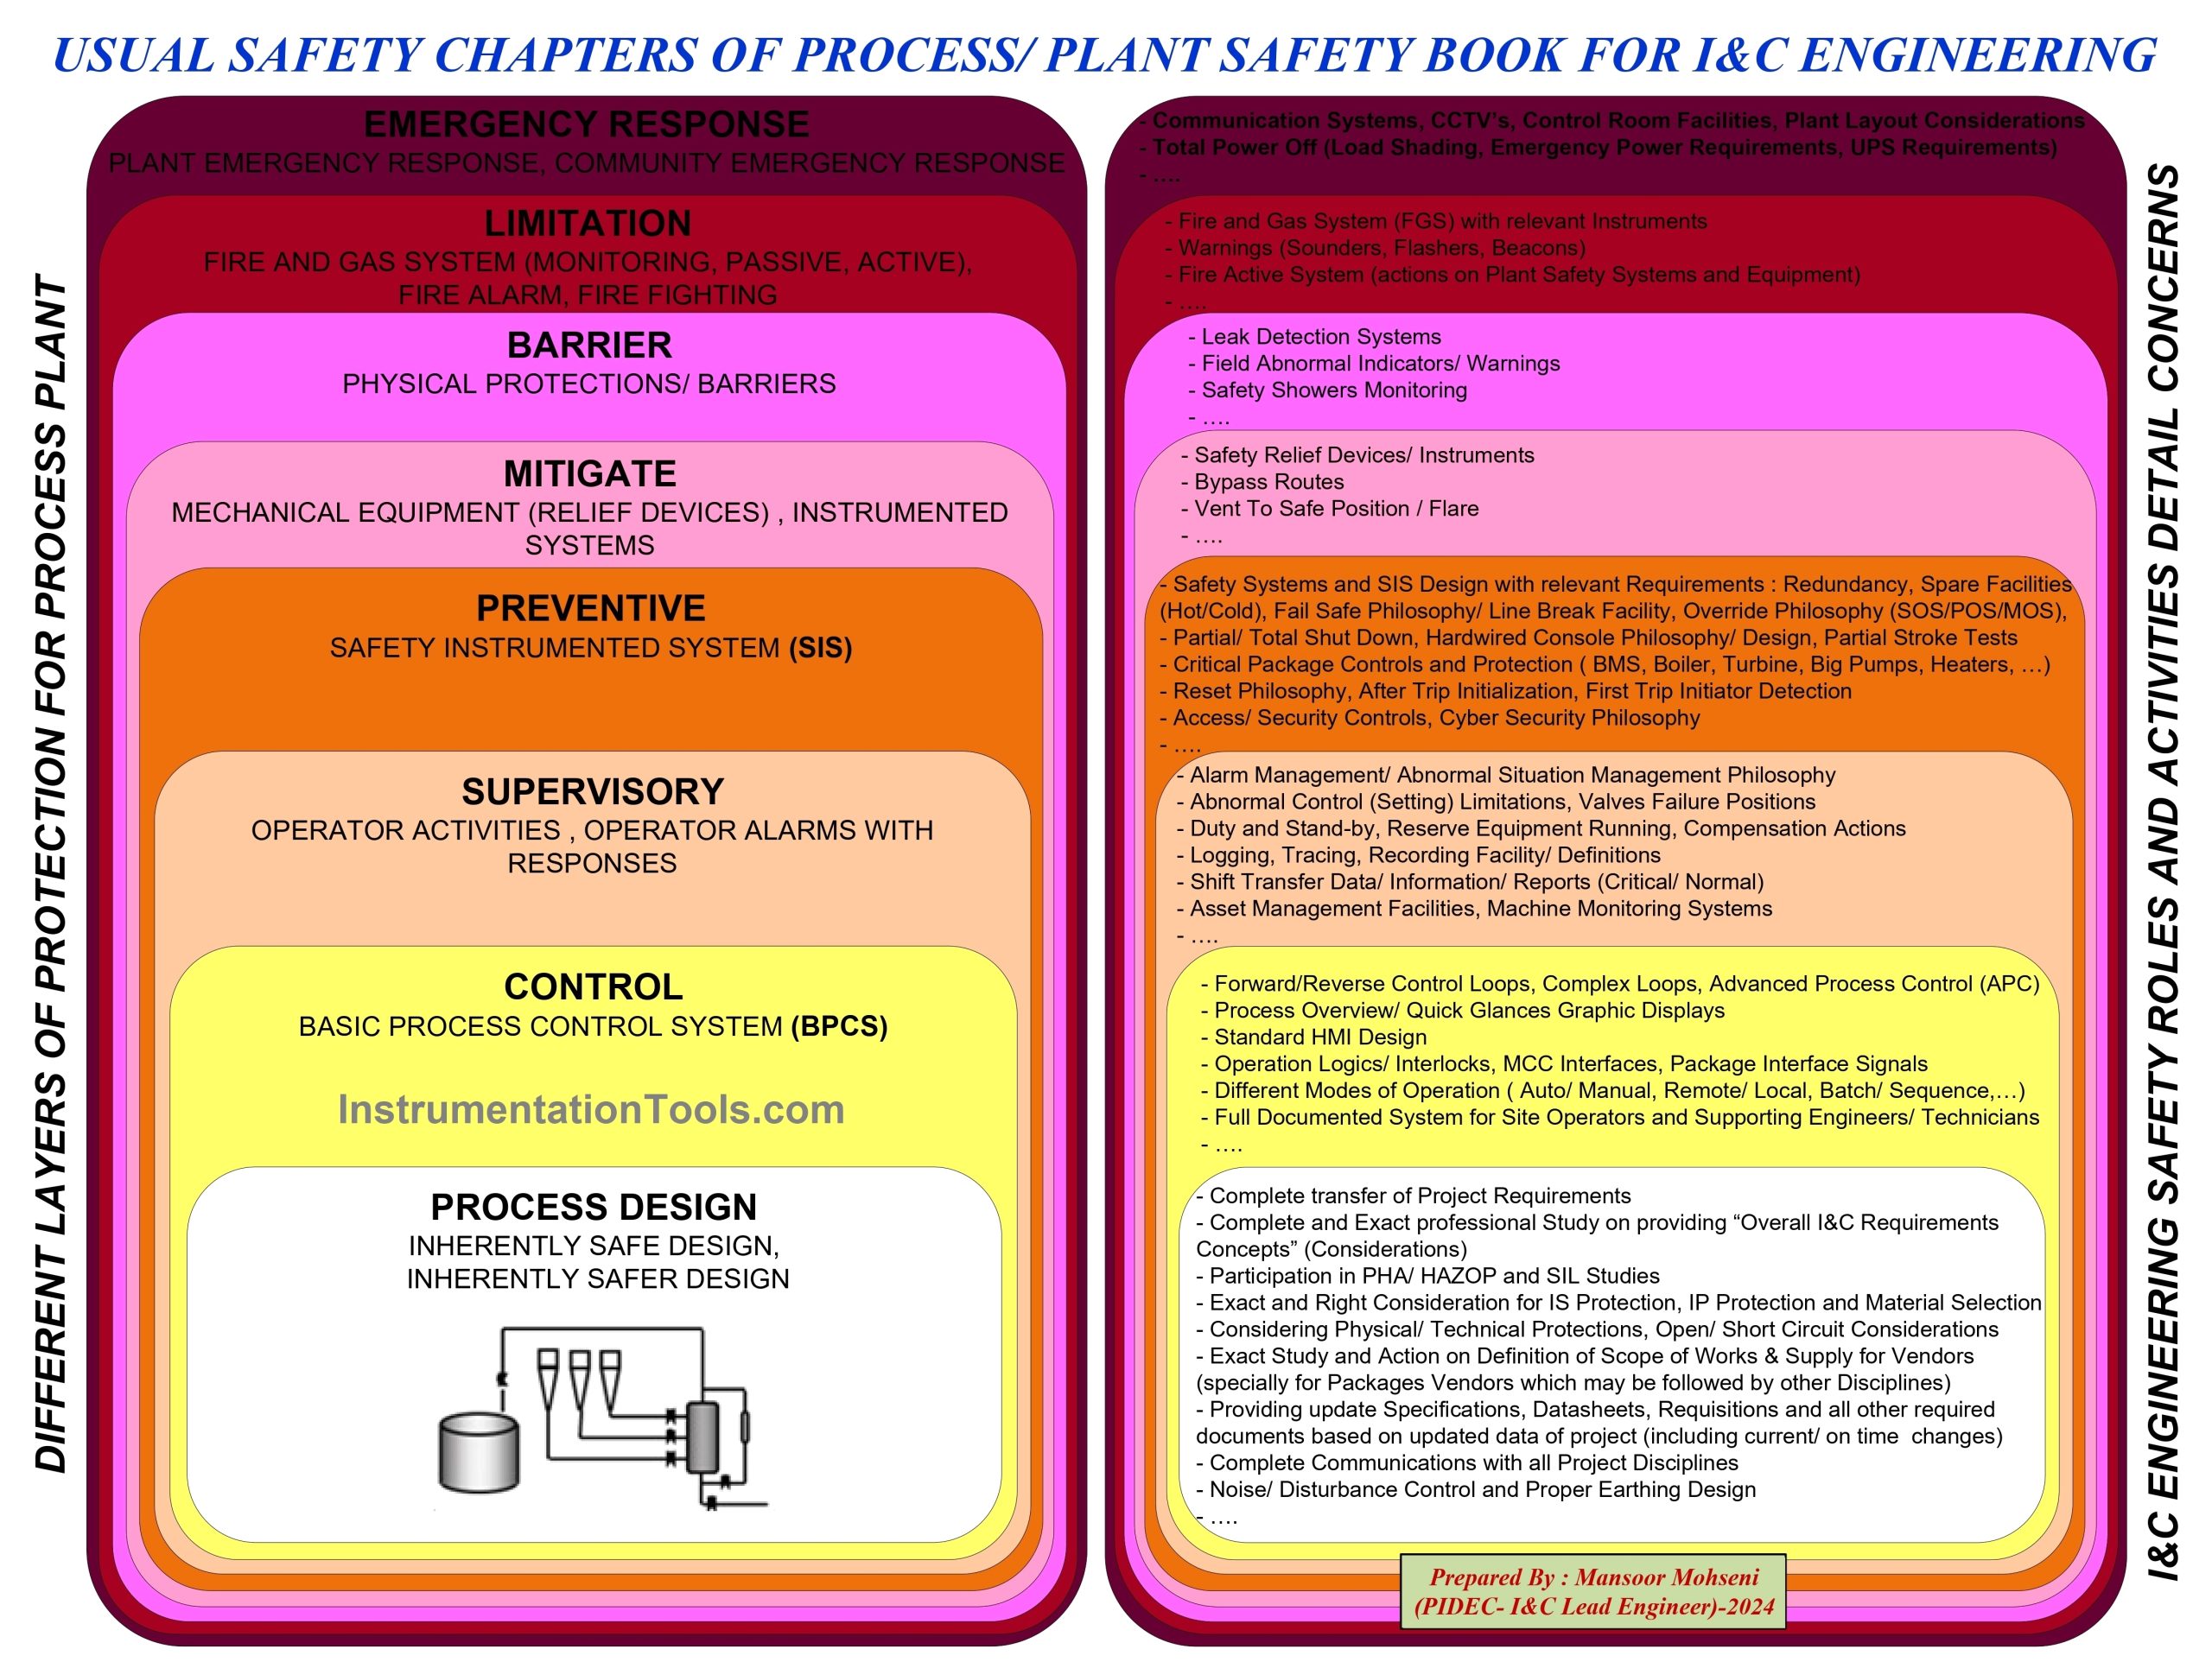 Instrumentation and Control Engineering Safety Activity Model